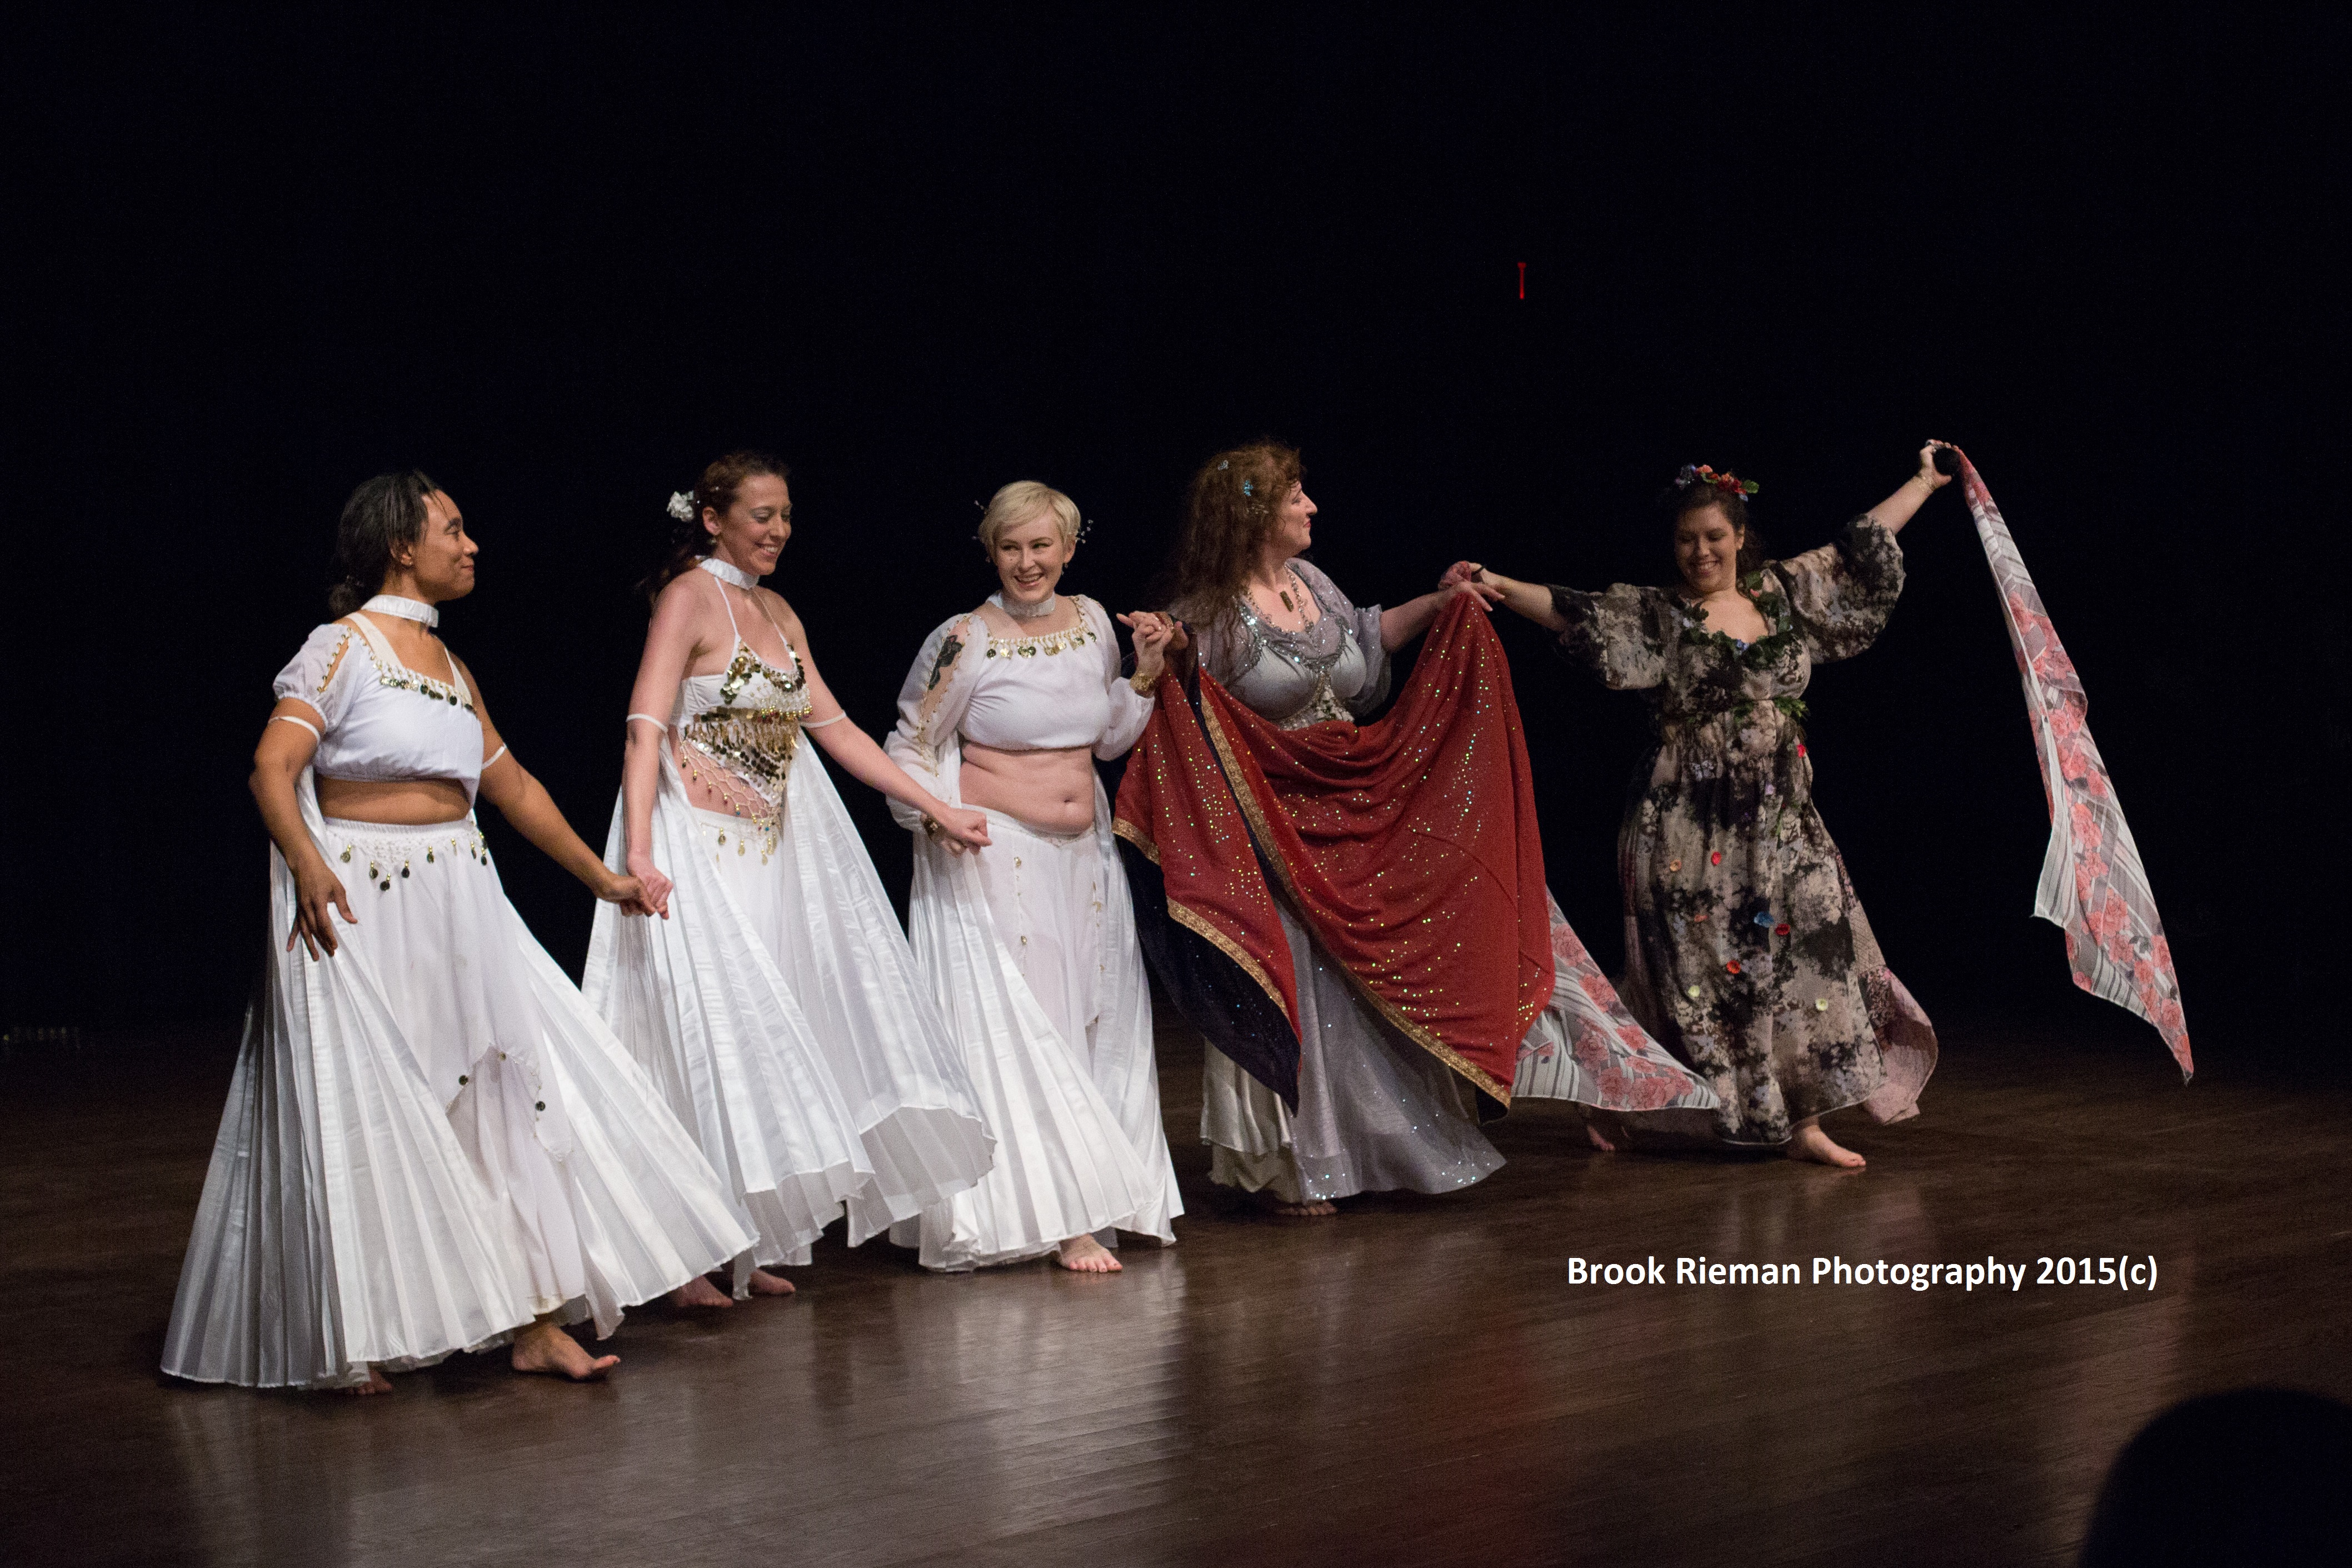 Performance picture of DDBD. Dance: "Primavera" choreography and costuming by Verna Vendetta. 2015